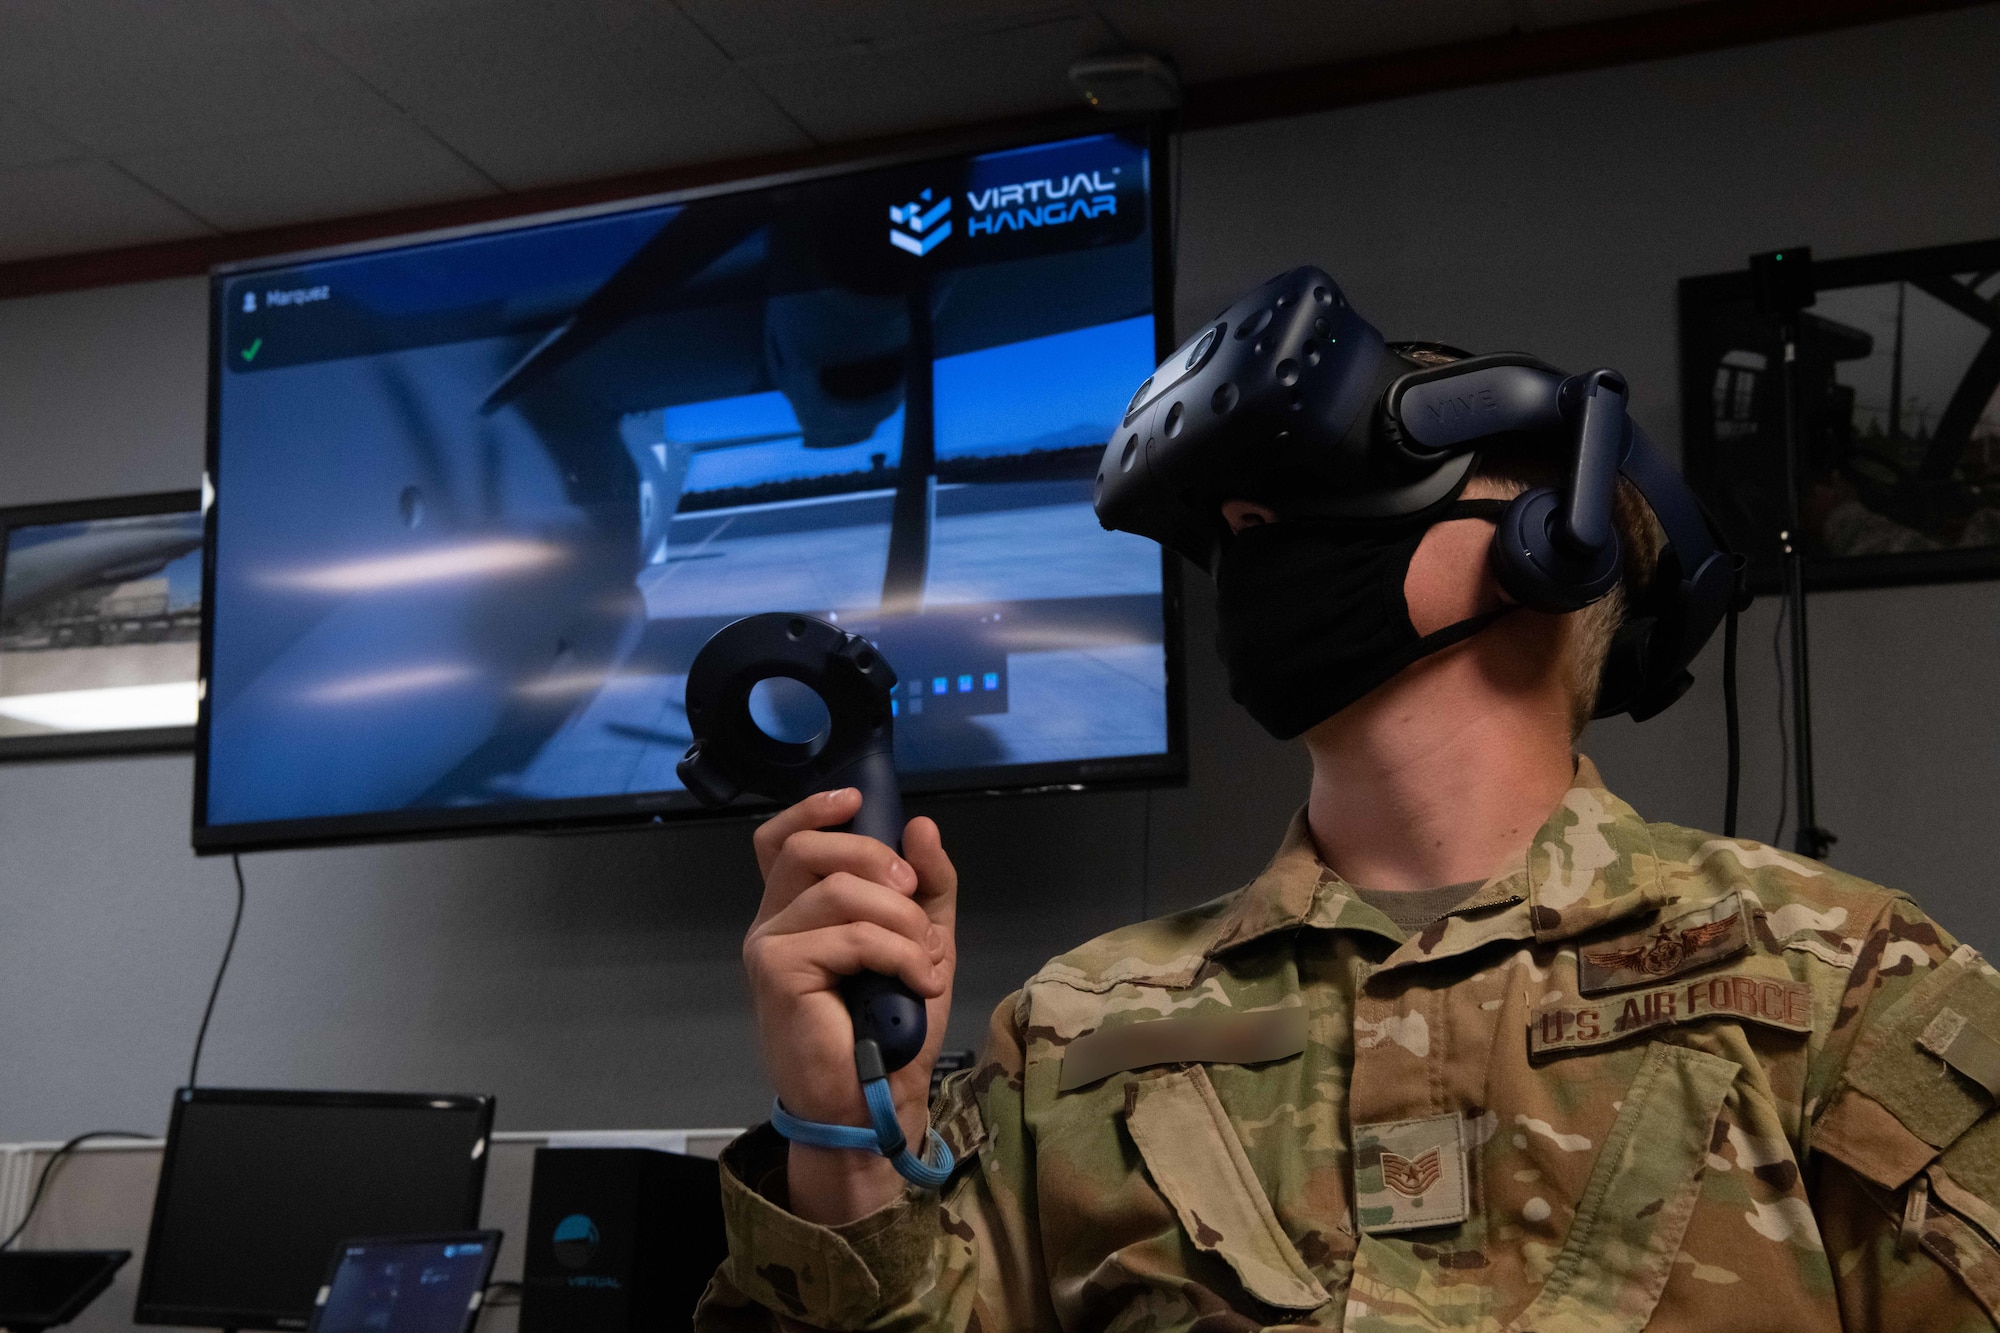 U.S. Air Force Tech. Sgt. Matthew experiences an MC-130J Commando II virtual reality maintenance training program during an Air Education and Training Command Integrated Technology Platform demonstration April 15, 2021, at Cannon Air Force Base, N.M. ITP team members from around the Air Force showed event attendees how VR training programs have already benefitted other squadrons and are ready for rapid acquisition and assimilation into current aircraft maintenance operations. (U.S. Air Force photo illustration by Staff Sgt. Peter Reft/photo manipulated for operational security)